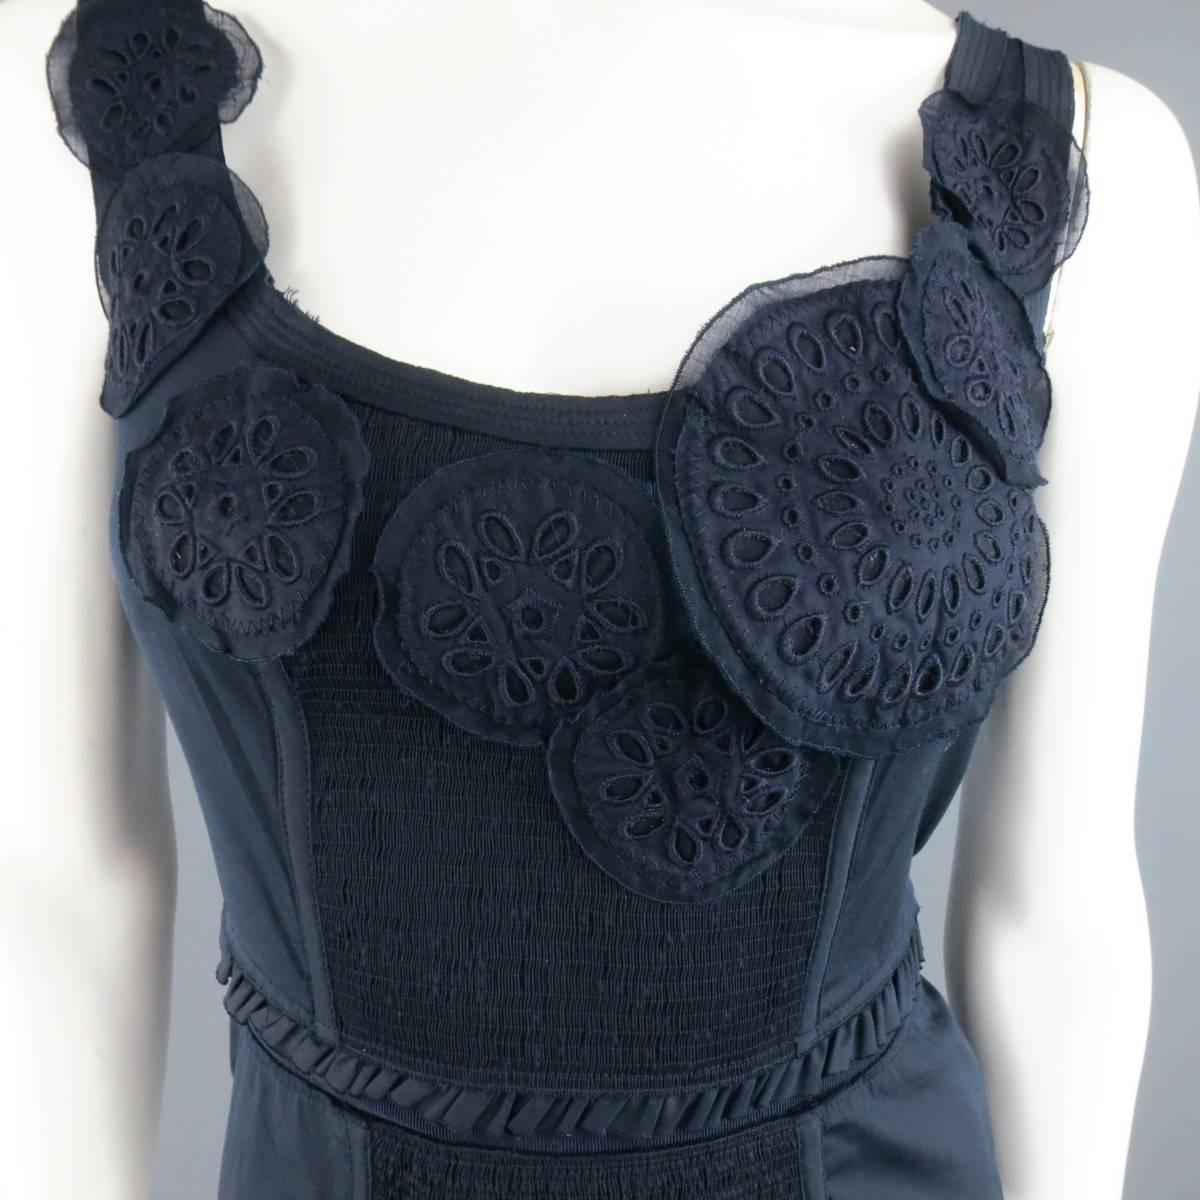 PRADA navy blue stretch cotton sleeveless tank blouse features a textured stretch front panel, embroidered appliques, pleated waist band,  and side zipper closure. Made in Italy.
 
Excellent Pre-Owned Condition.
Marked: 40 IT
 
Measurements:
 
Bust: